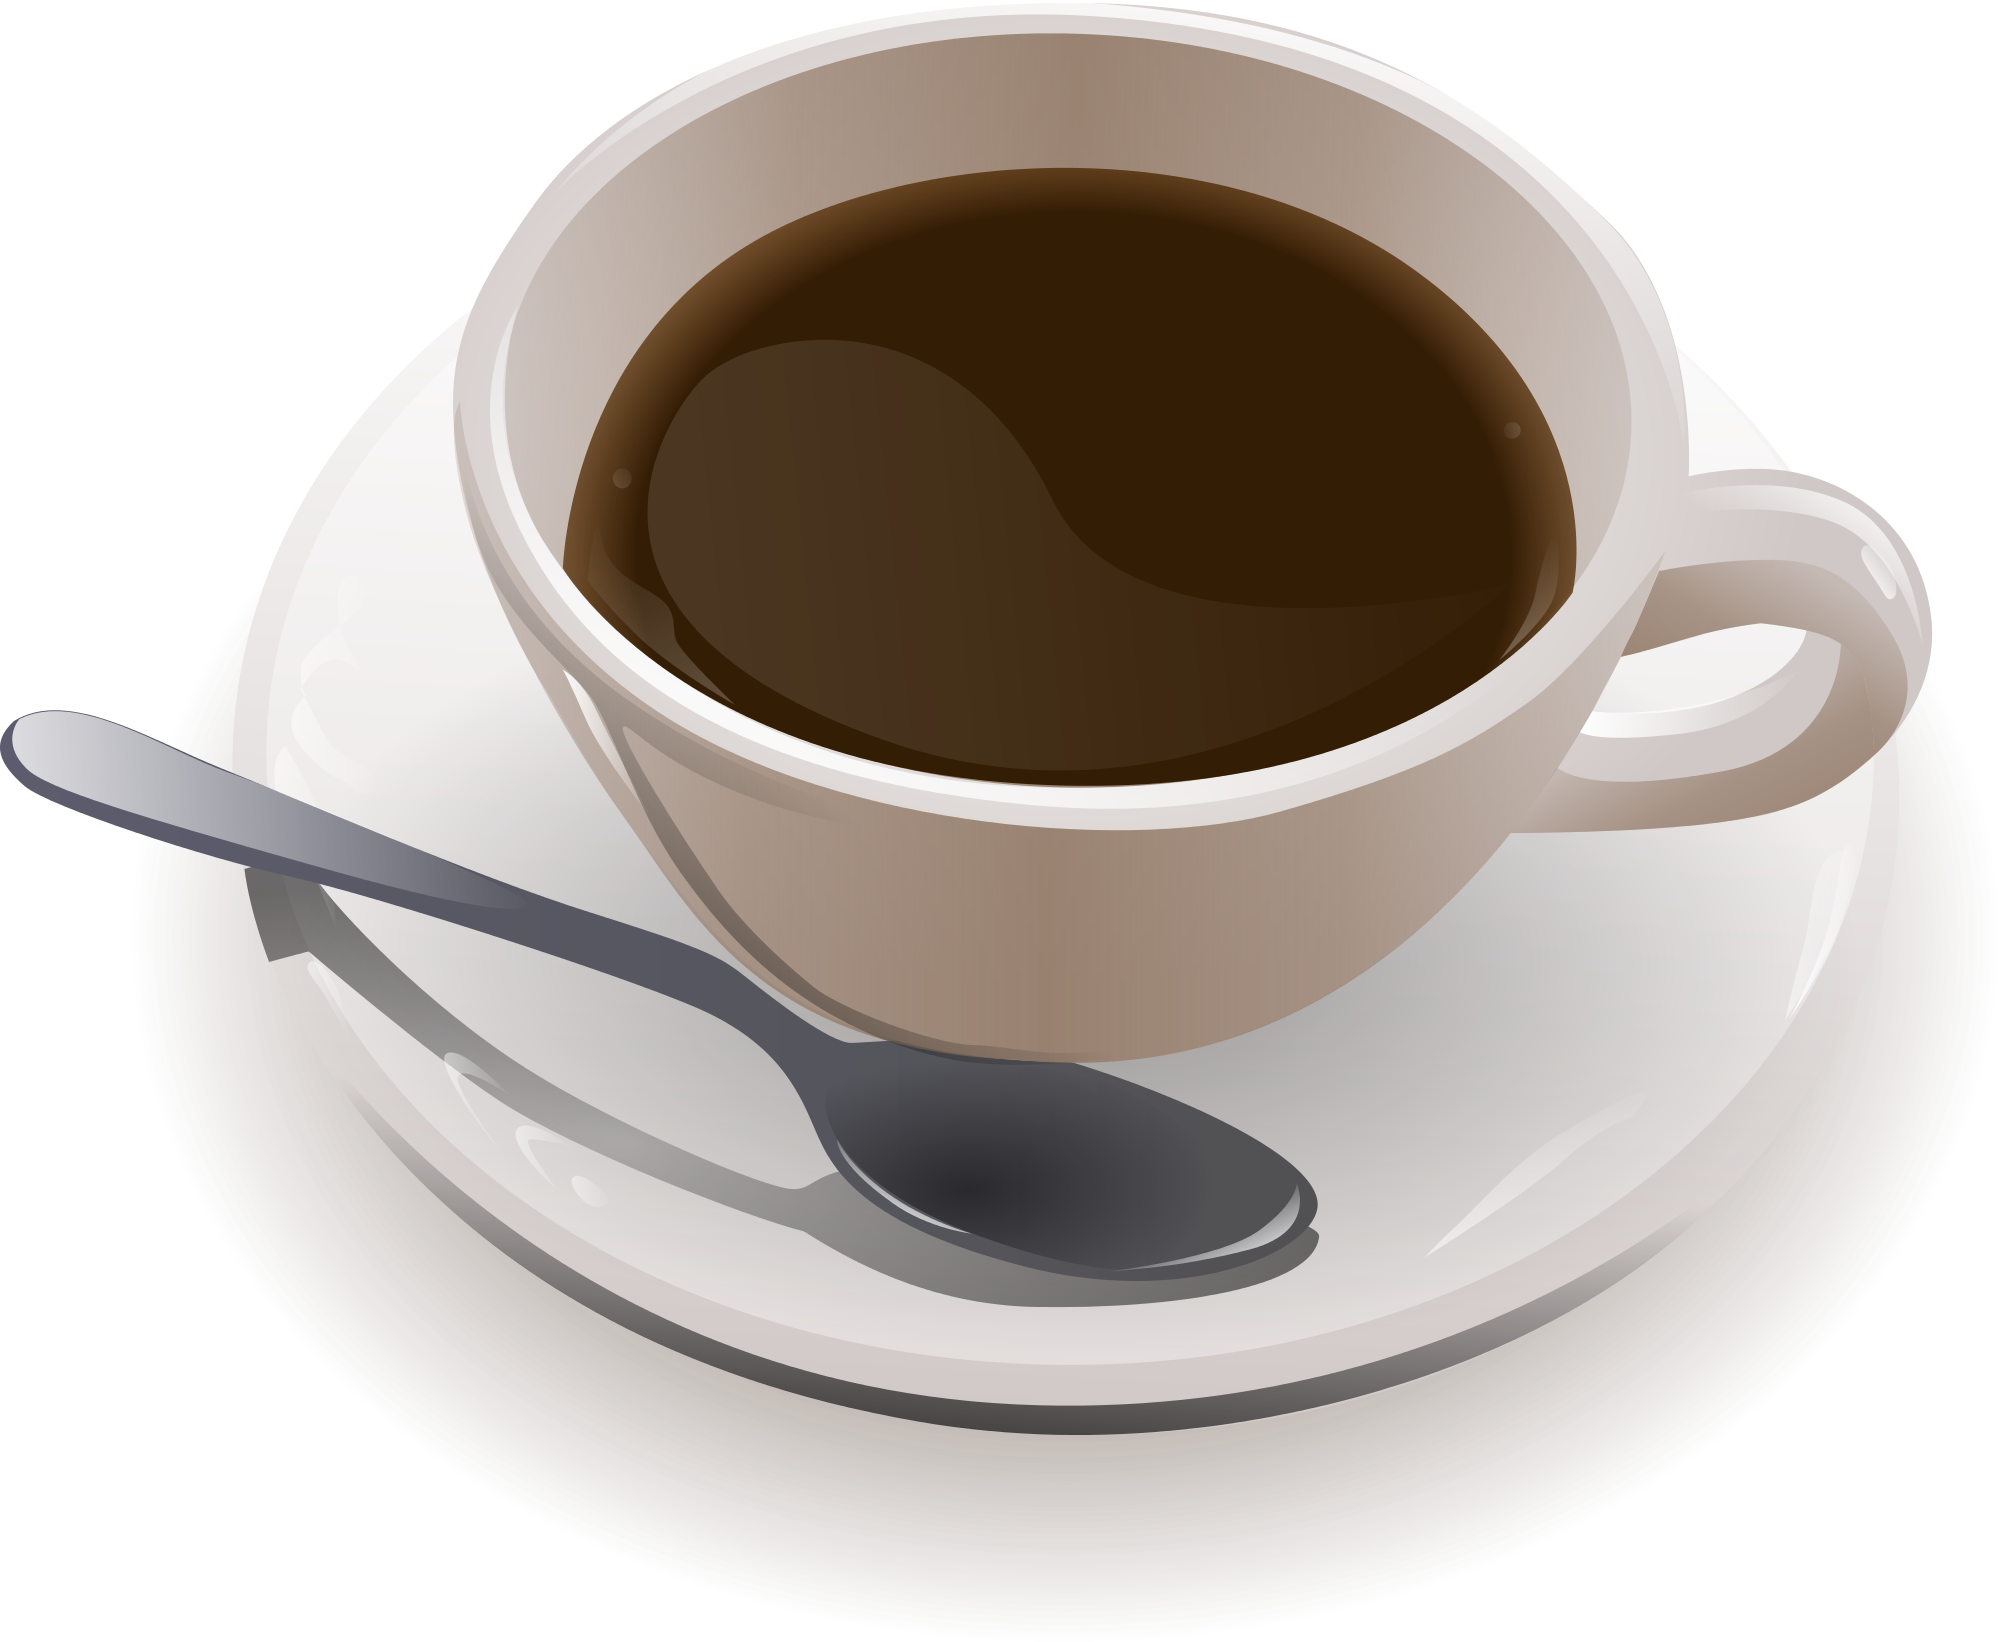 File:Cup-o-coffee-simple.svg - Wikimedia Commons